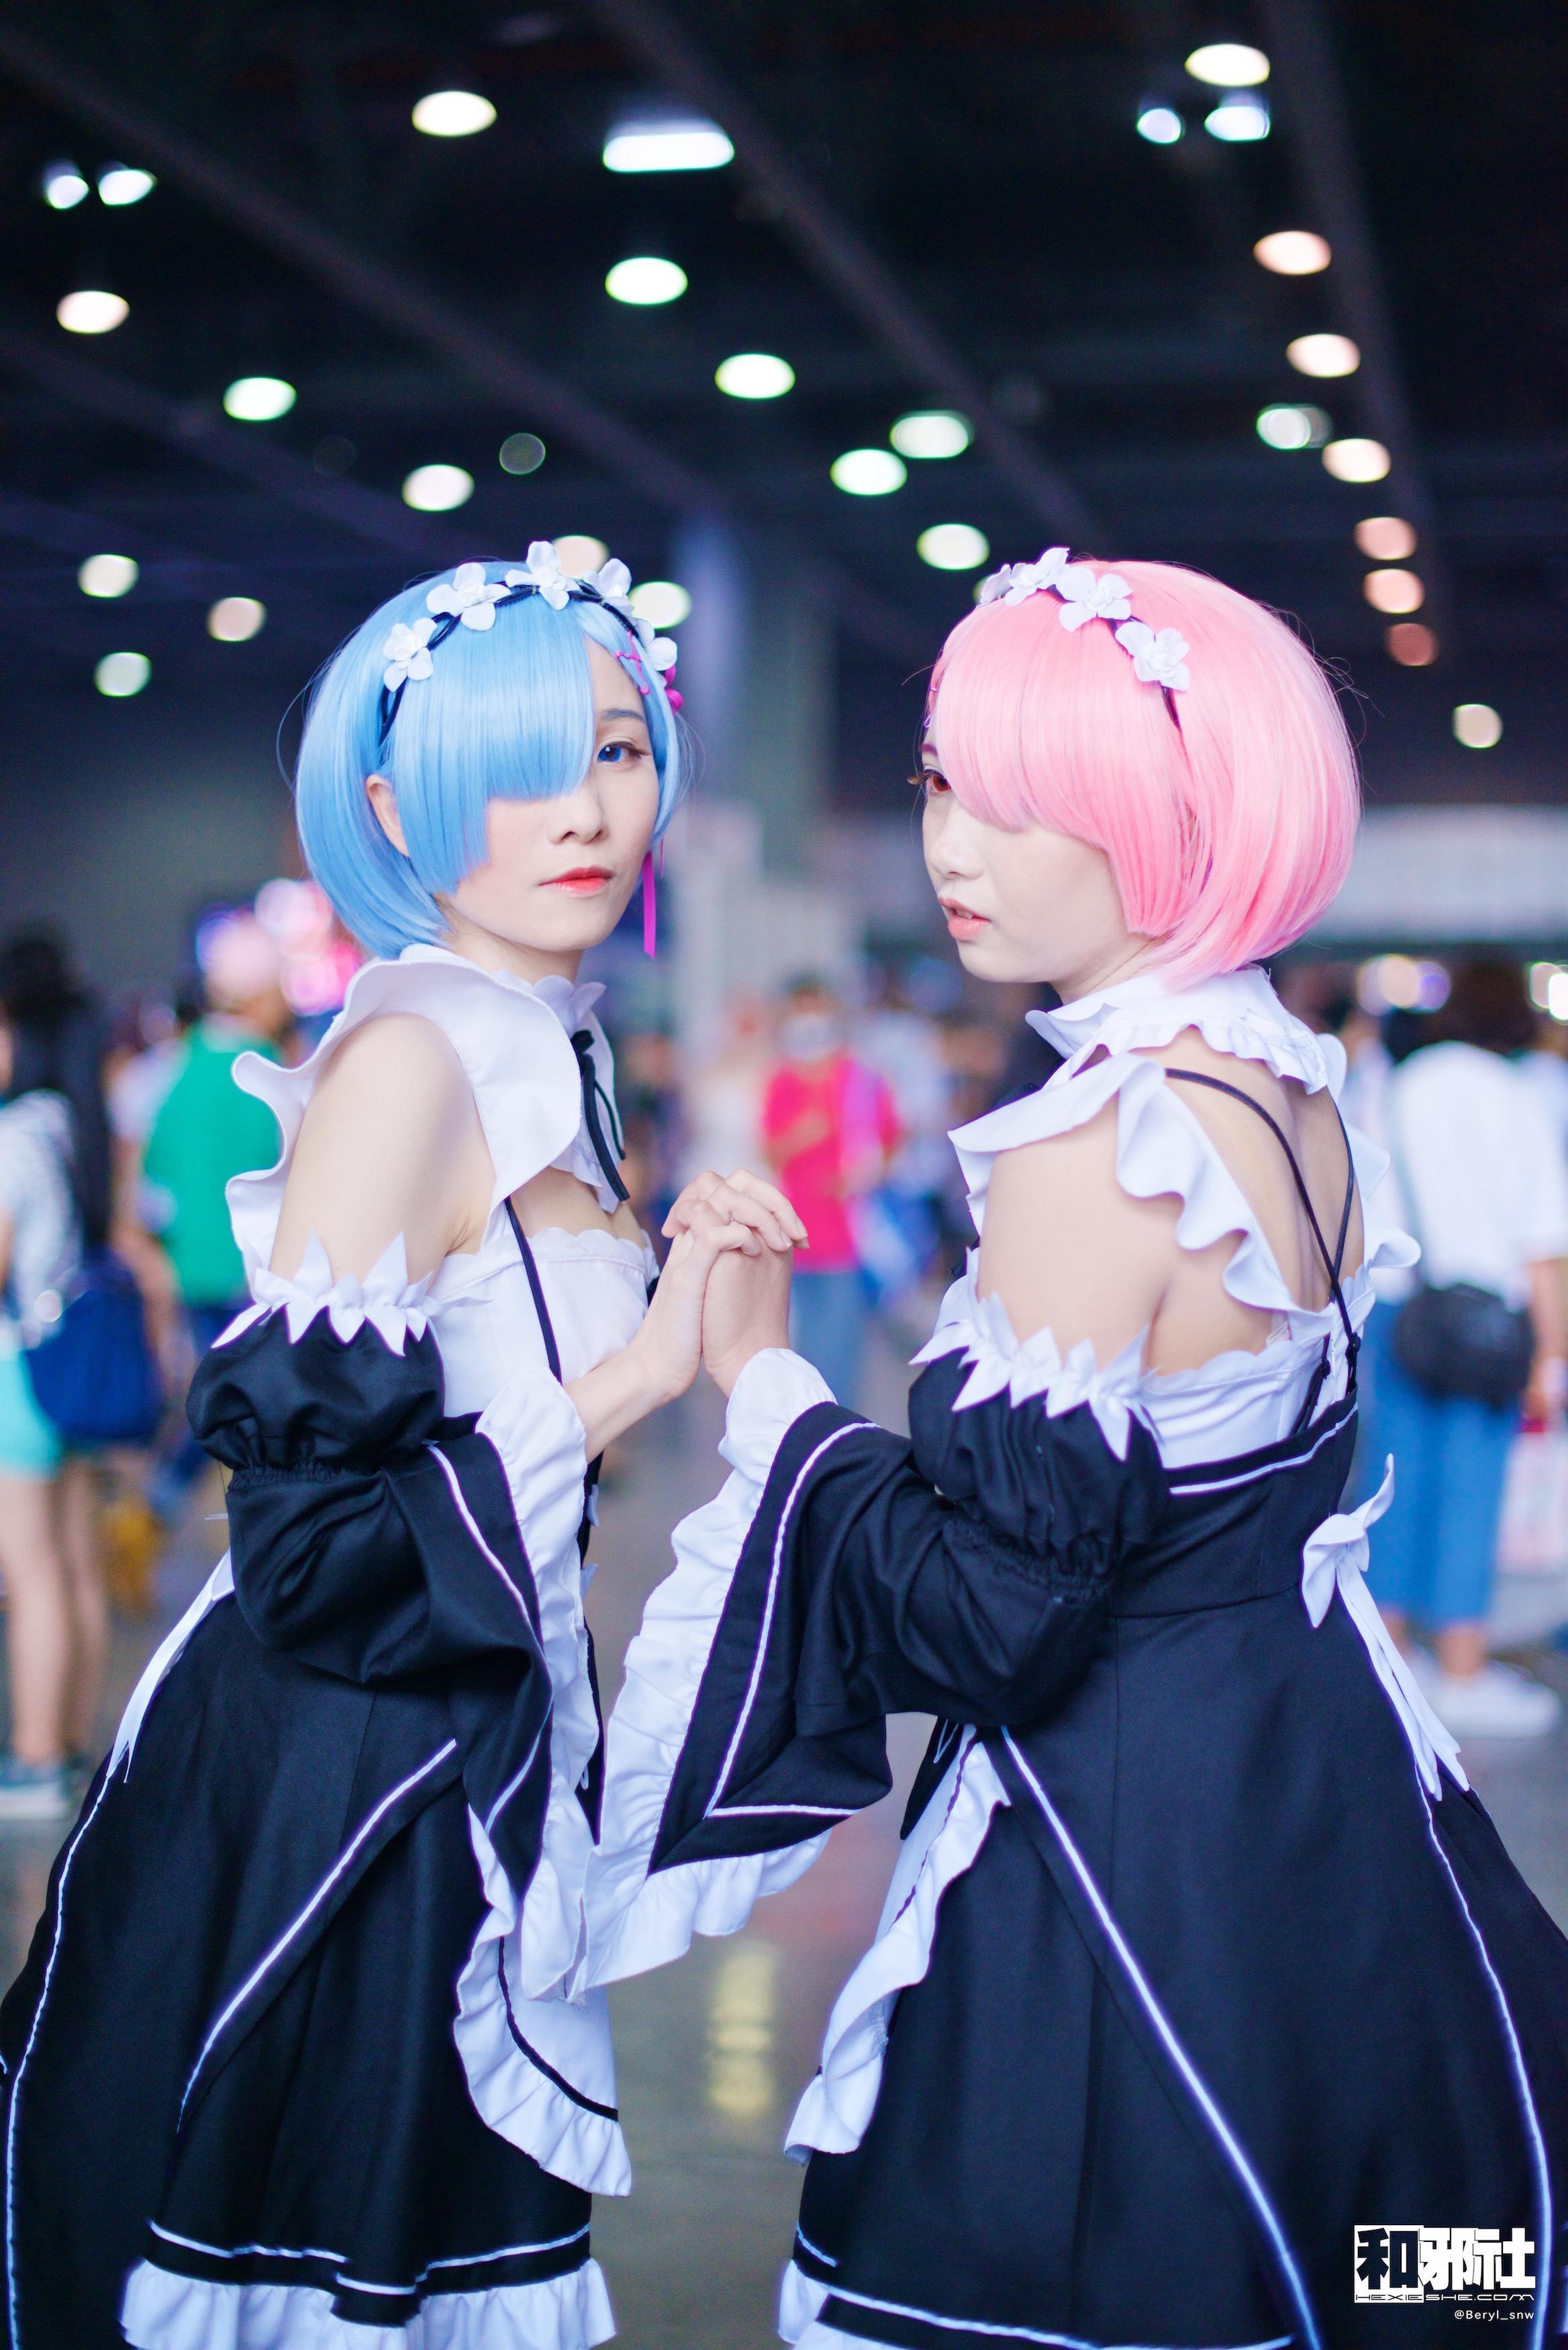  Anime  Cosplay  4K  Wallpapers  for Android APK Download